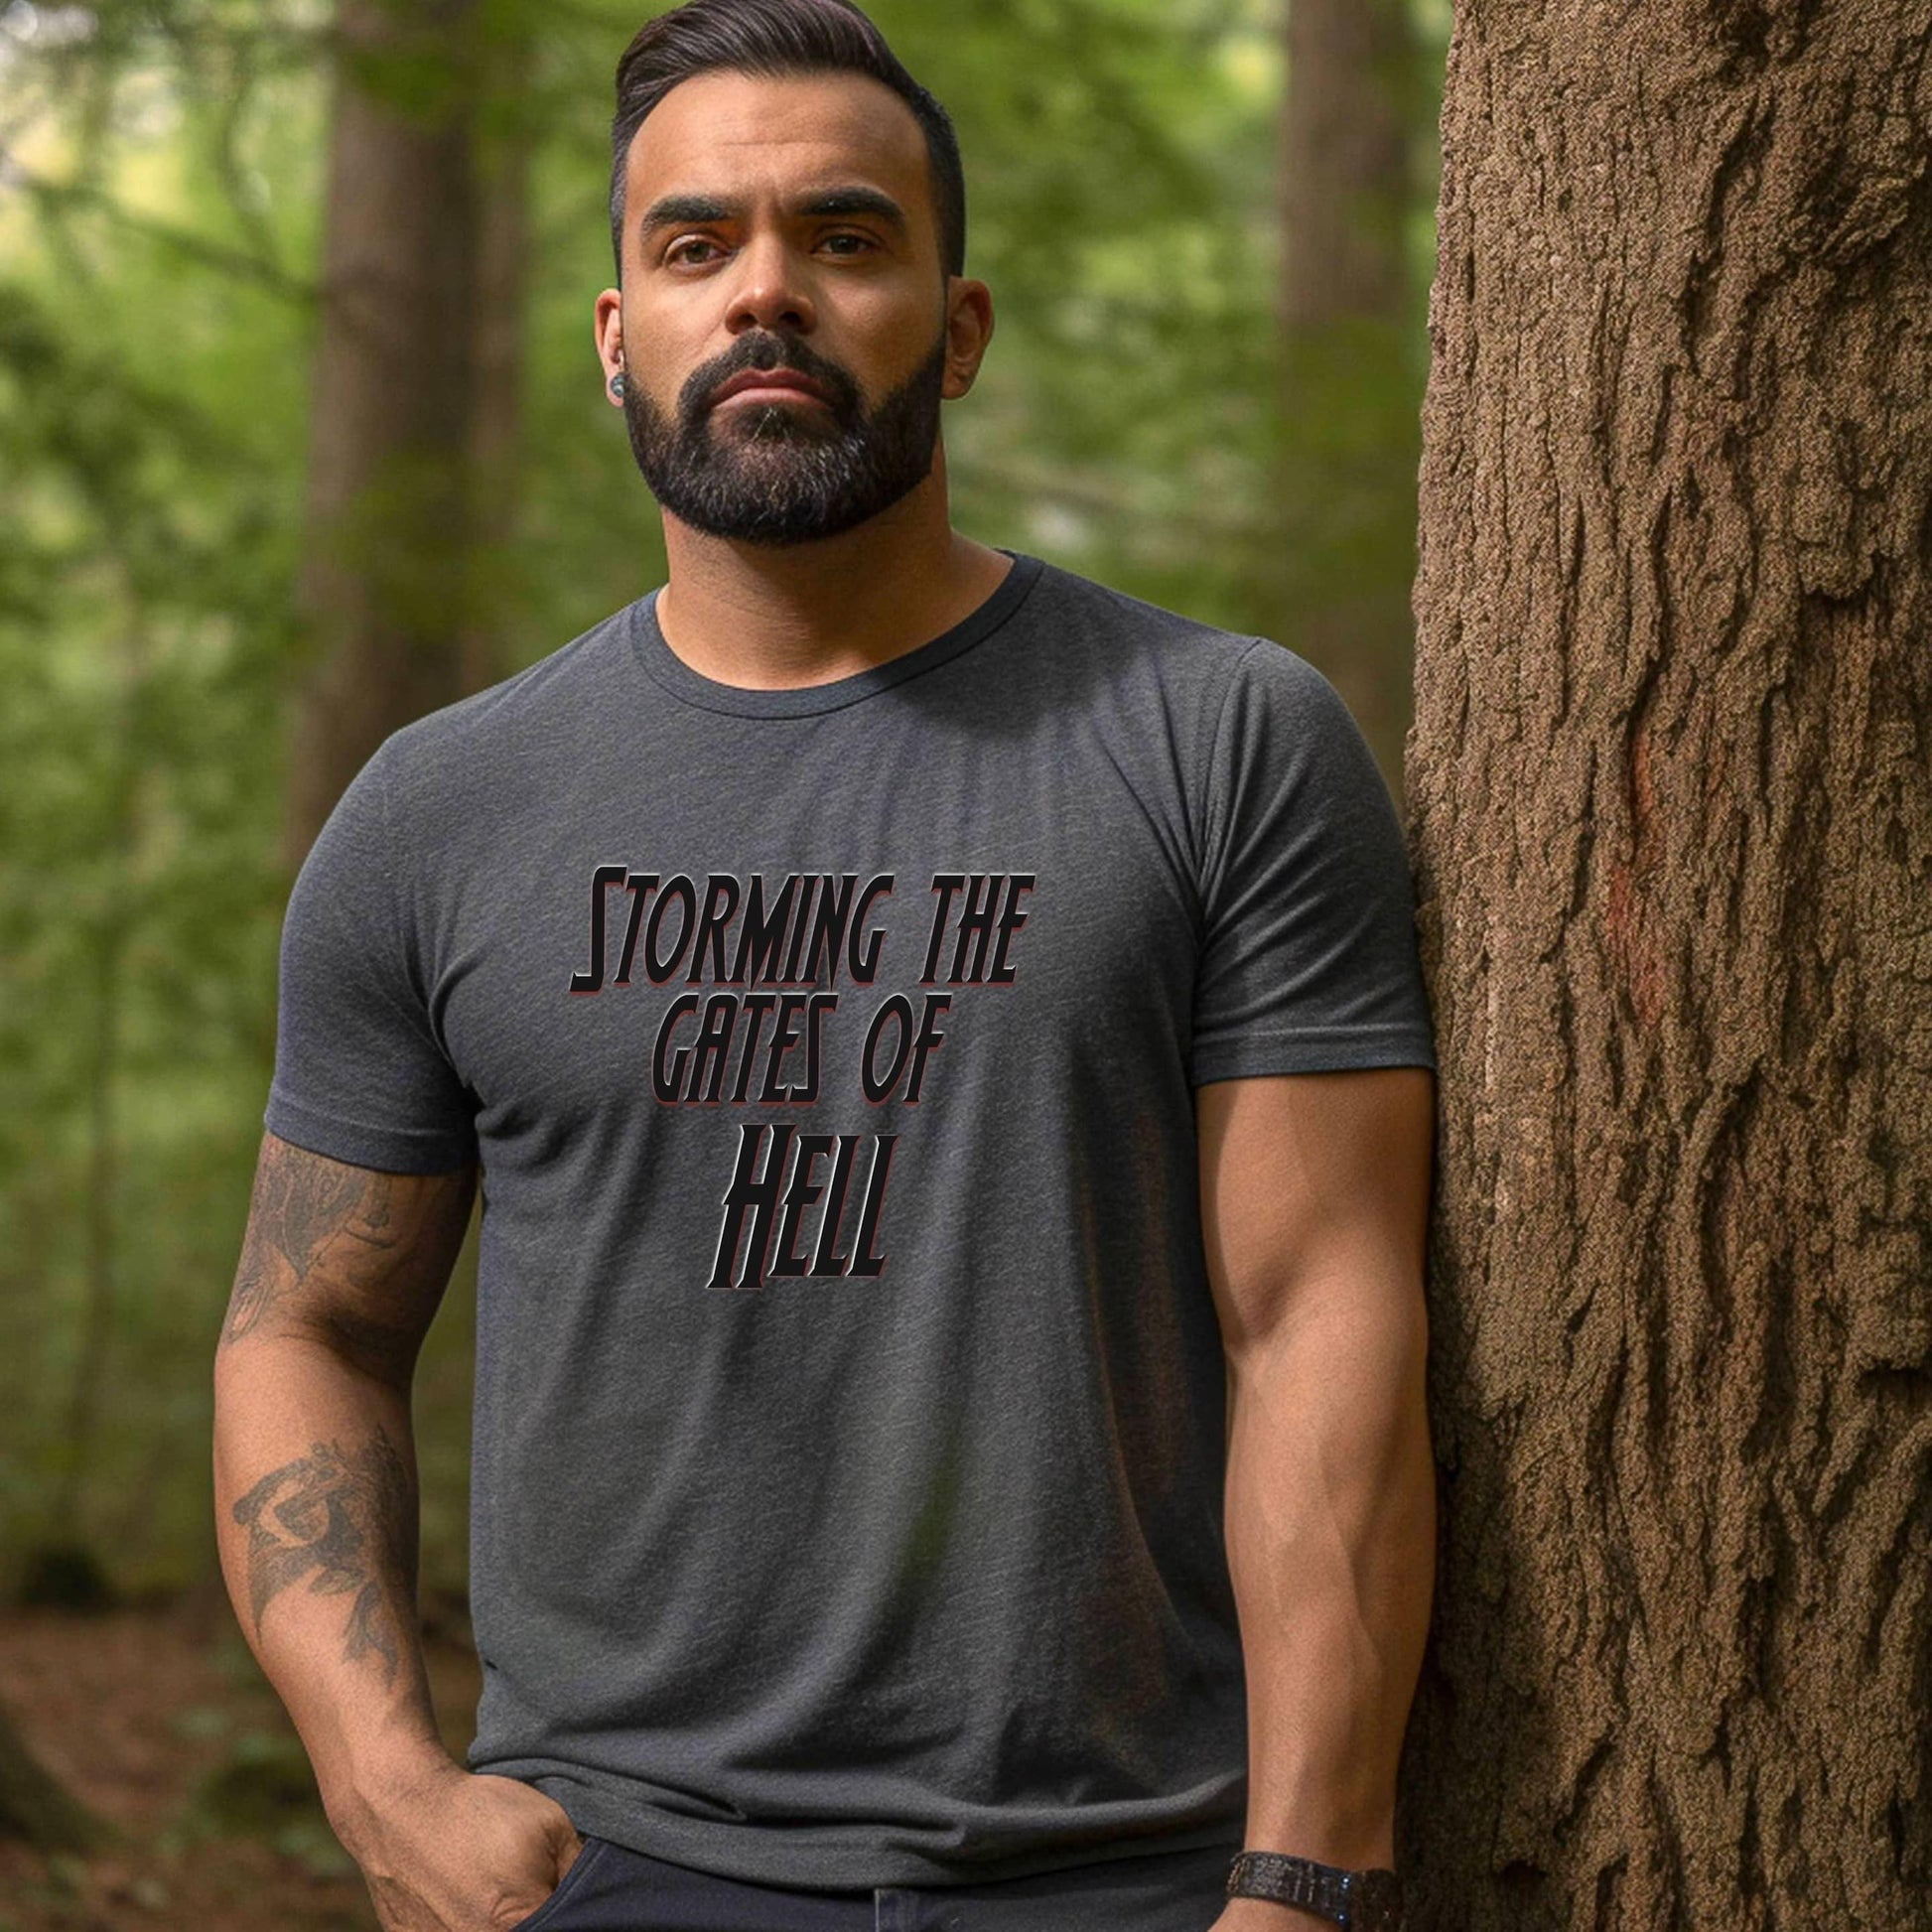 Storming The Gates Of Hell Pastor Edition Men’s Tee - JT Footprint Apparel